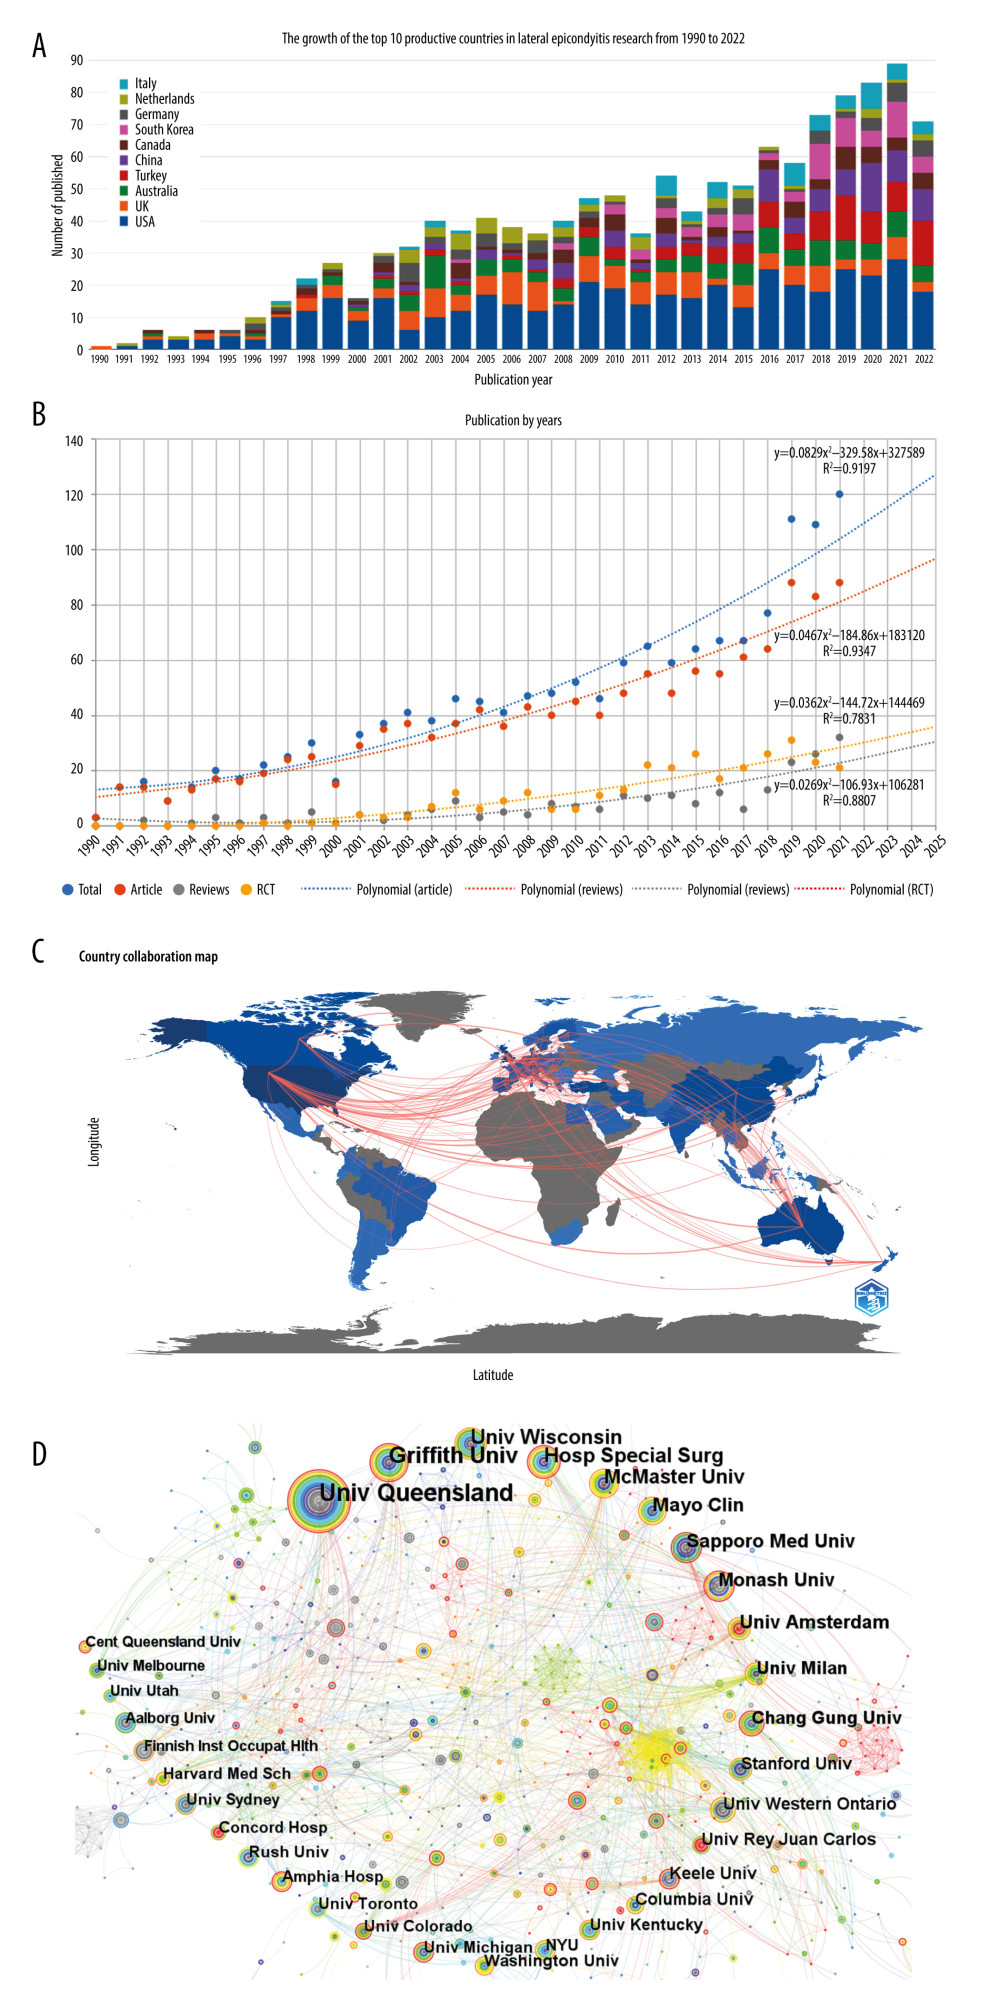 (A) Bibliometric analysis of the WoS core database SCIE output. The number of publications on research on lateral epicondylitis in different countries has changed year by year from 1990 to 2022. (B) Publication trends in the field of lateral epicondylitis research and the corresponding polynomial fit curves. (C). Econometric analysis of national collaborative literature in the field of lateral epicondylitis research, with darker colors representing more publications and connecting lines representing collaborative relationships. (D) Institutional co-occurrence network diagram for lateral epicondylitis. The circles in the chart indicate the volume of articles issued, with larger circles indicating more articles issued by the institution, the thickness of the outer purple circle representing the centrality of the institution, and the connecting lines indicating the existence of a collaborative or co-occurring relationship.